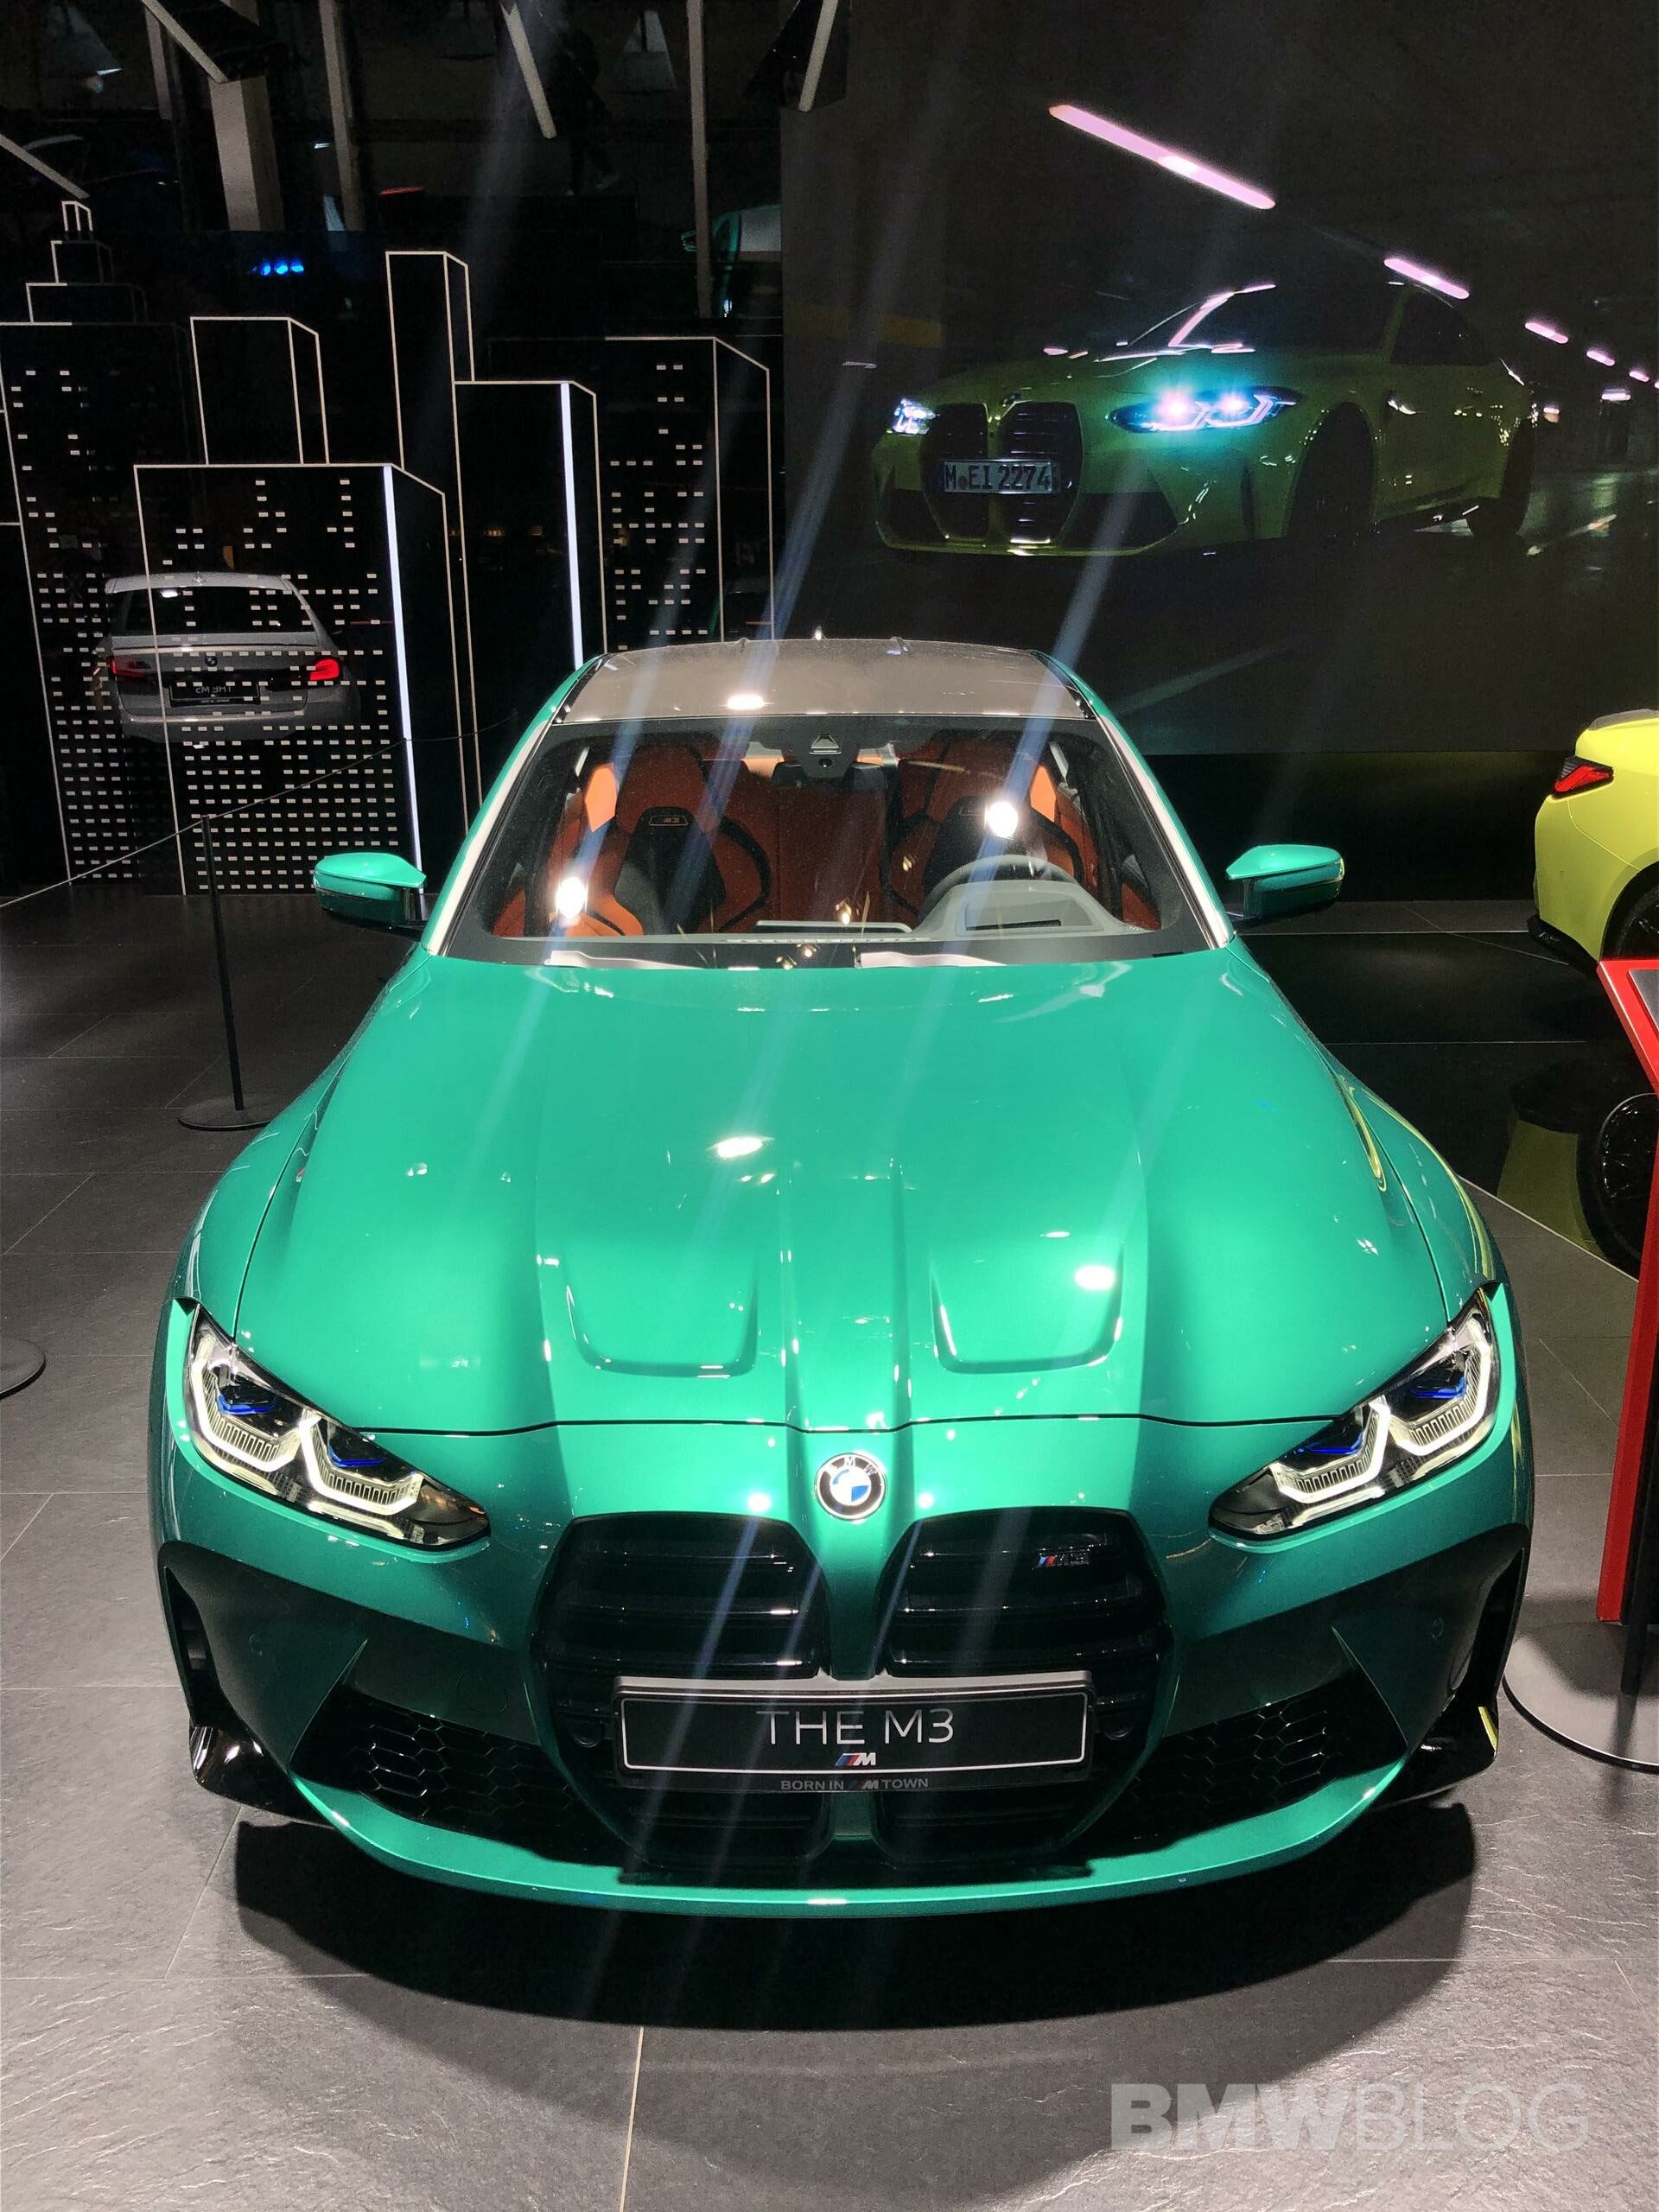 The New 2021 Bmw M3 G80 Displayed At The Bmw Welt Video Mimic News